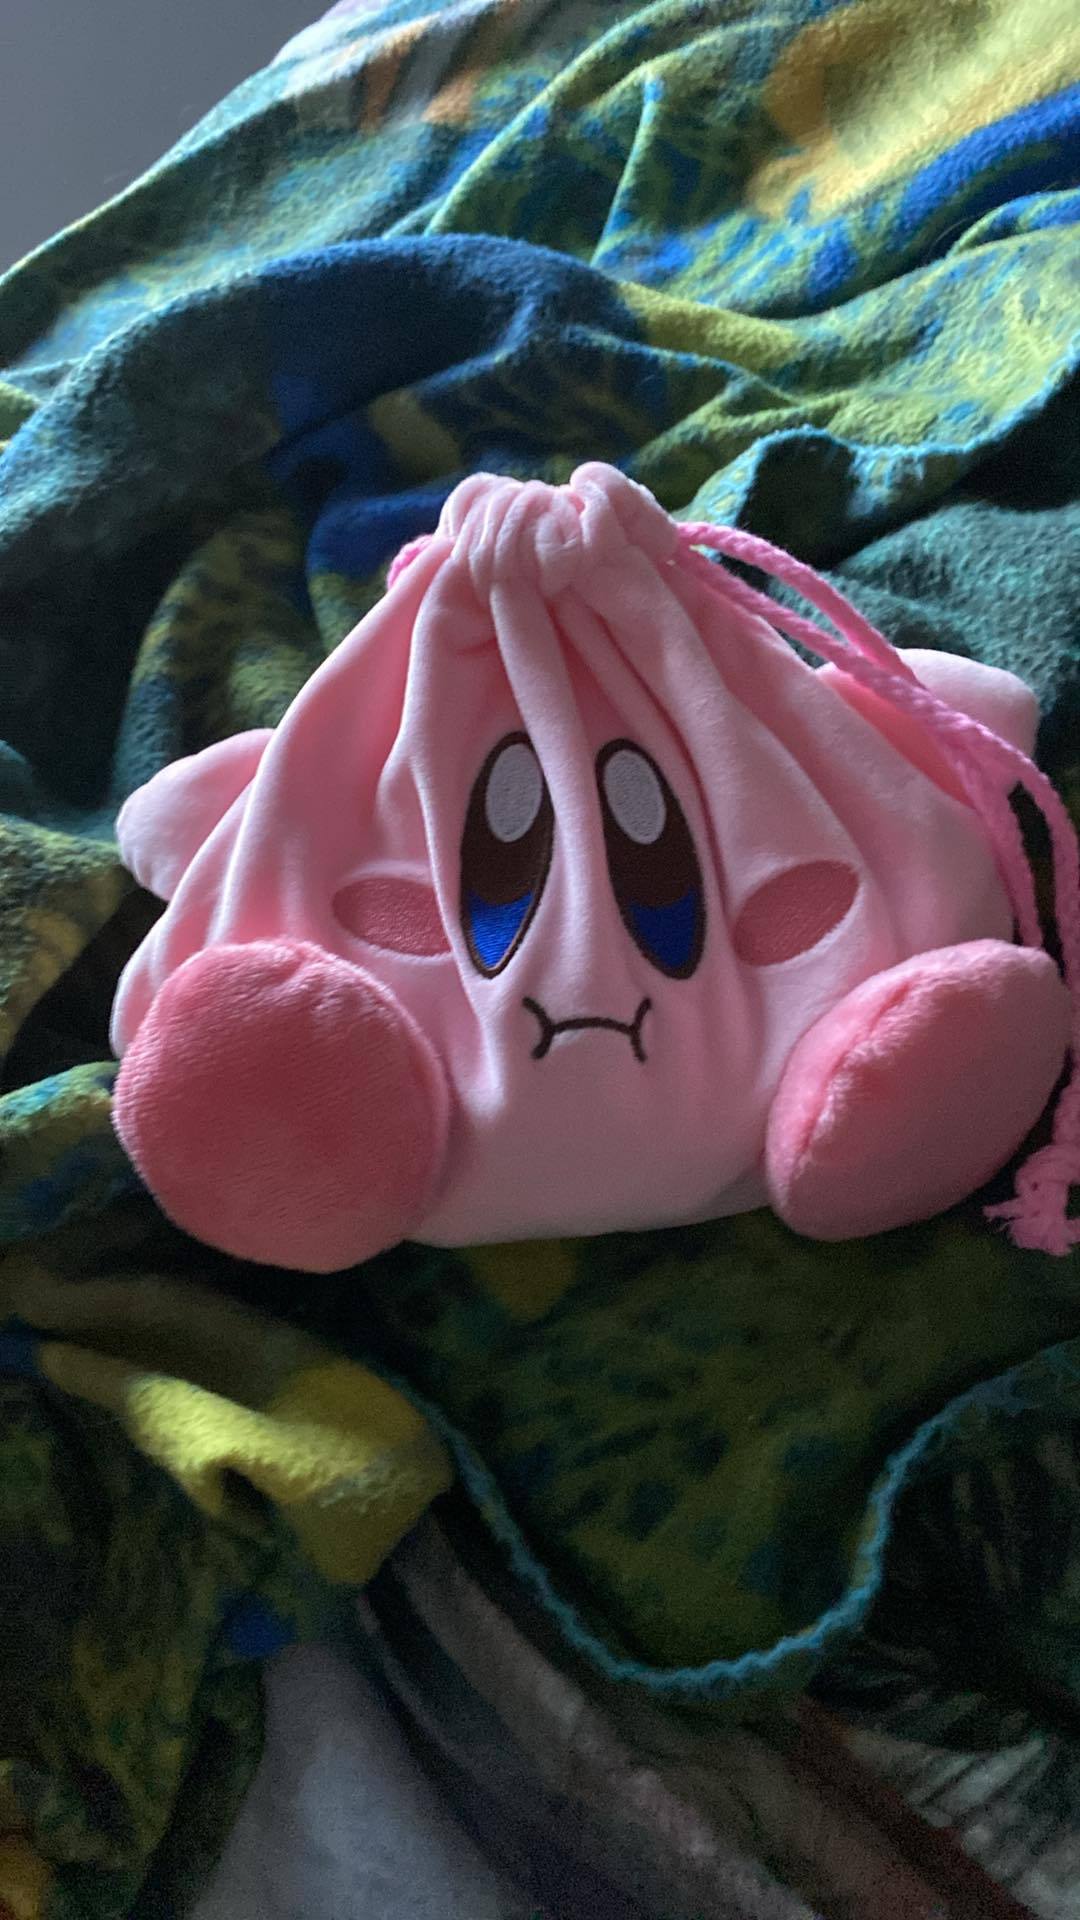 Does anyone else have this Astarion Plushie? : r/OnlyFangsbg3